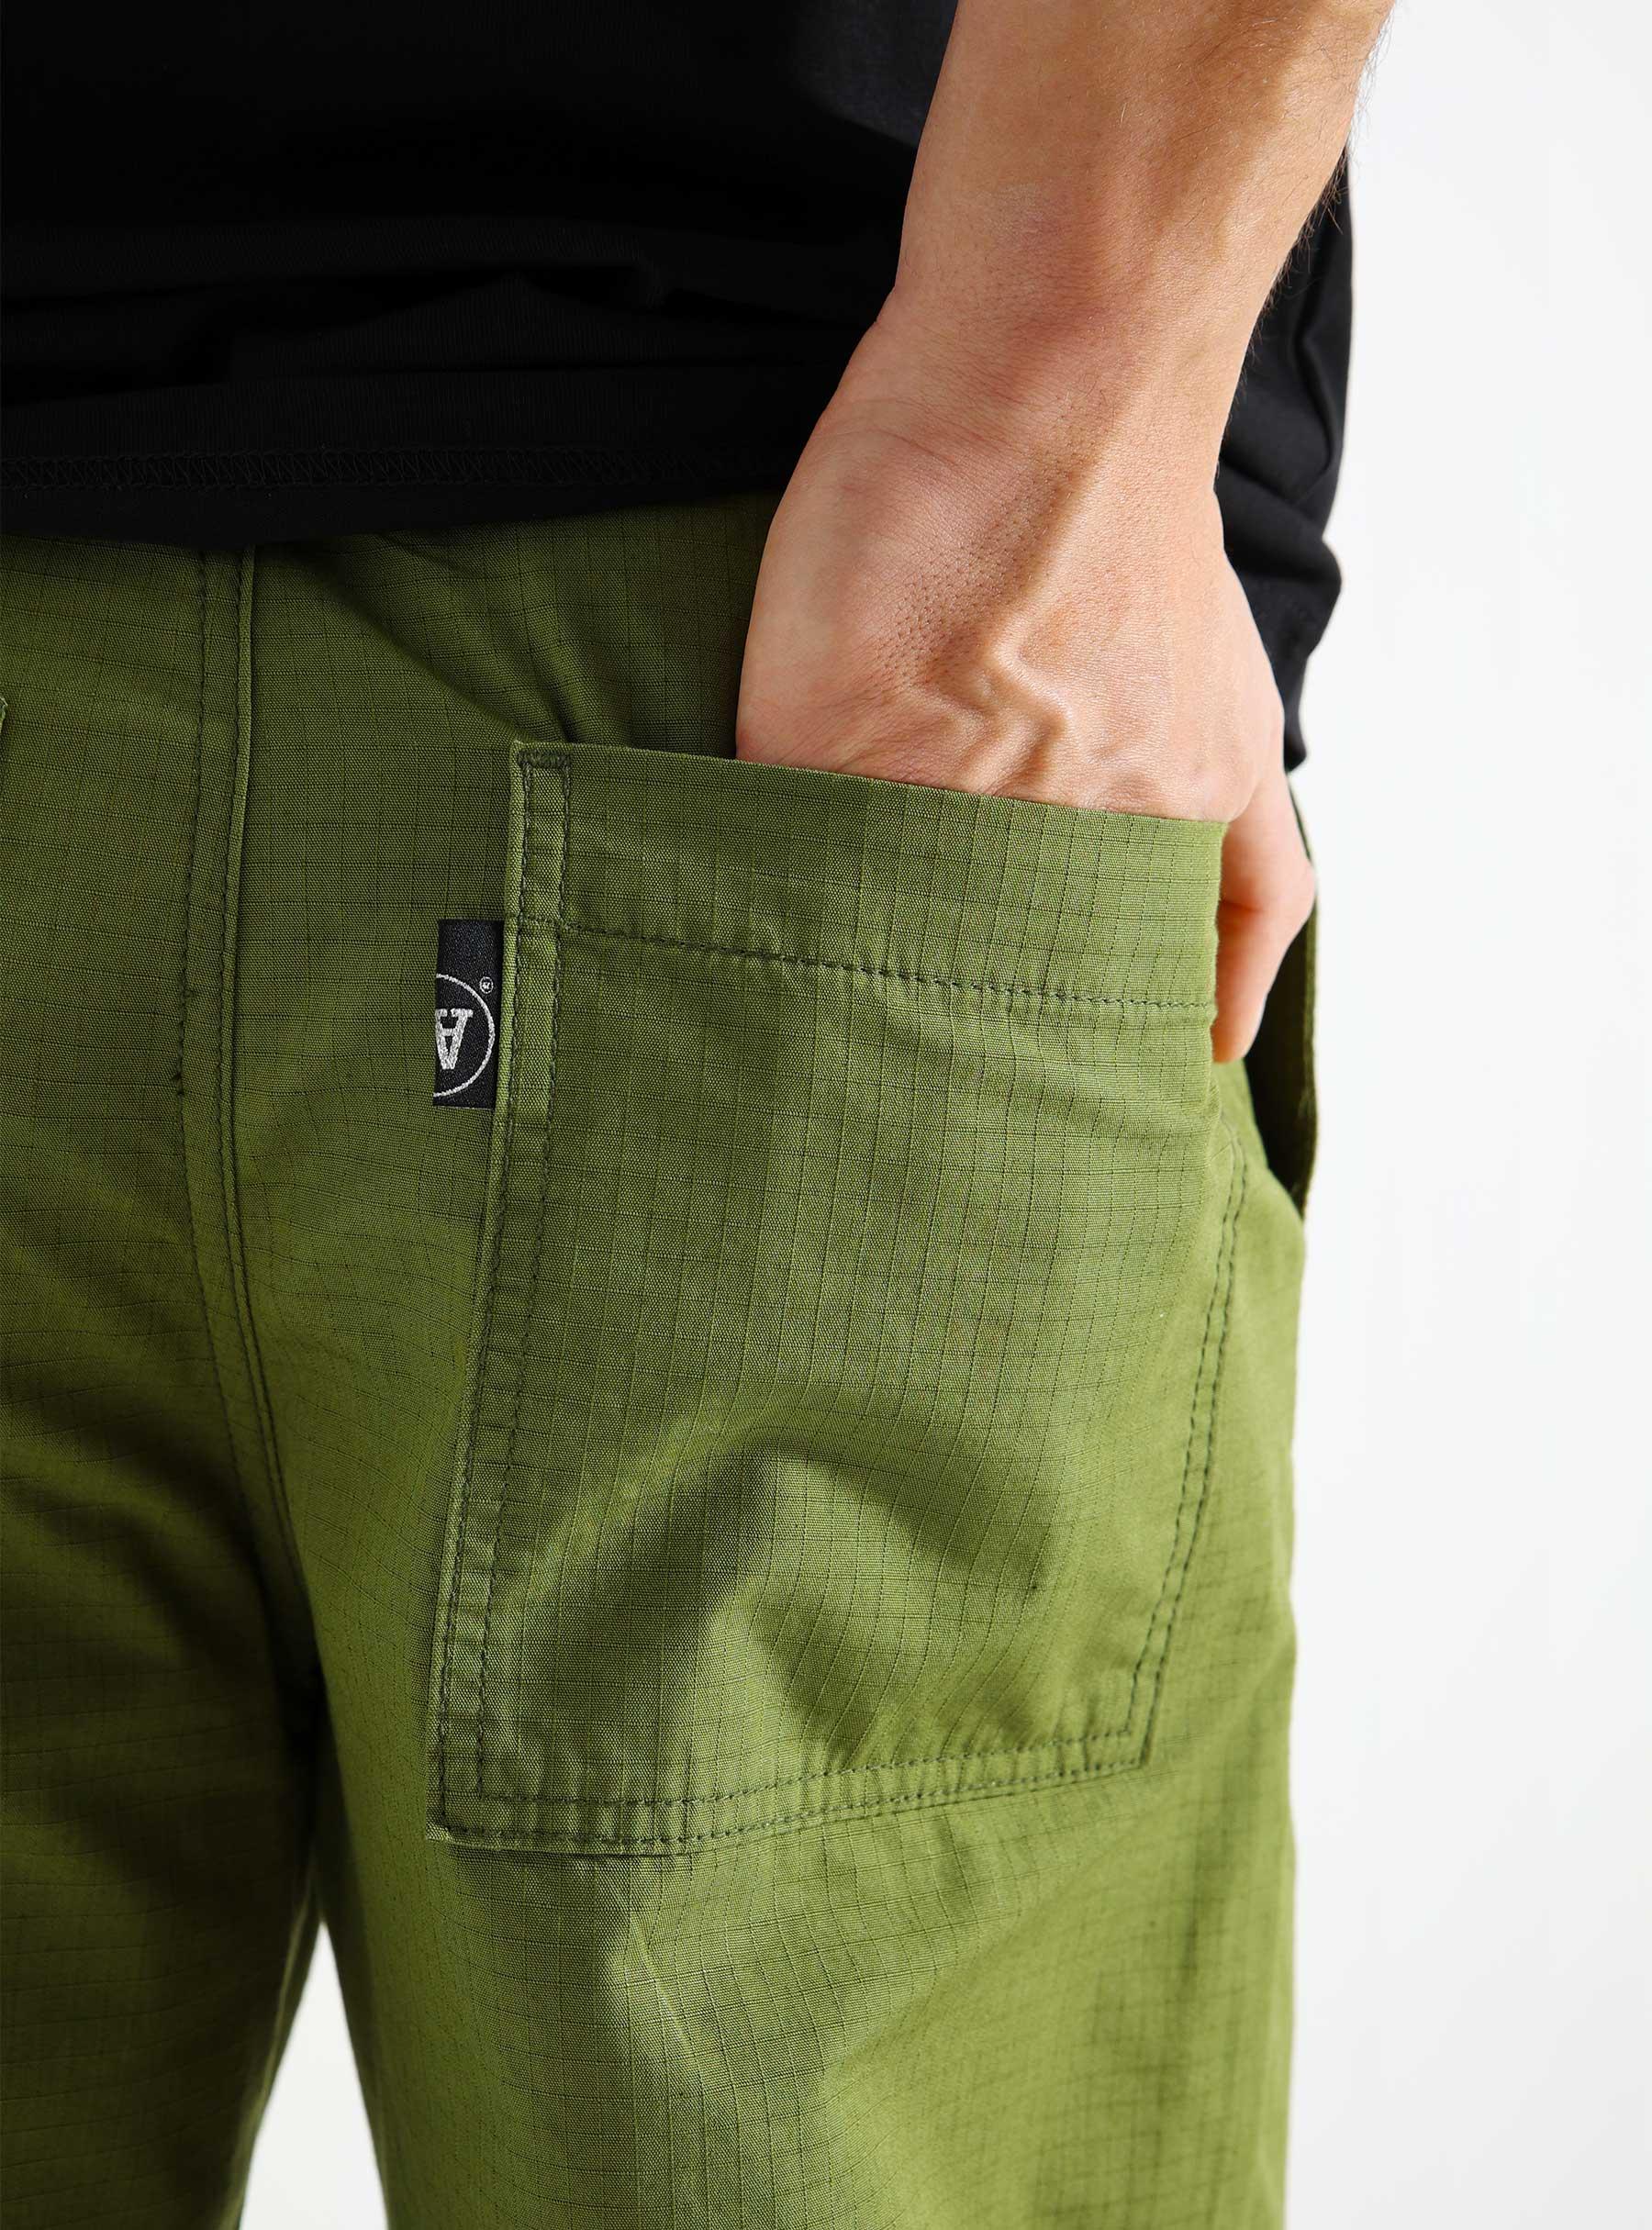 Lee Ripstop Trousers 8051 Fatique Green 10295005-5745